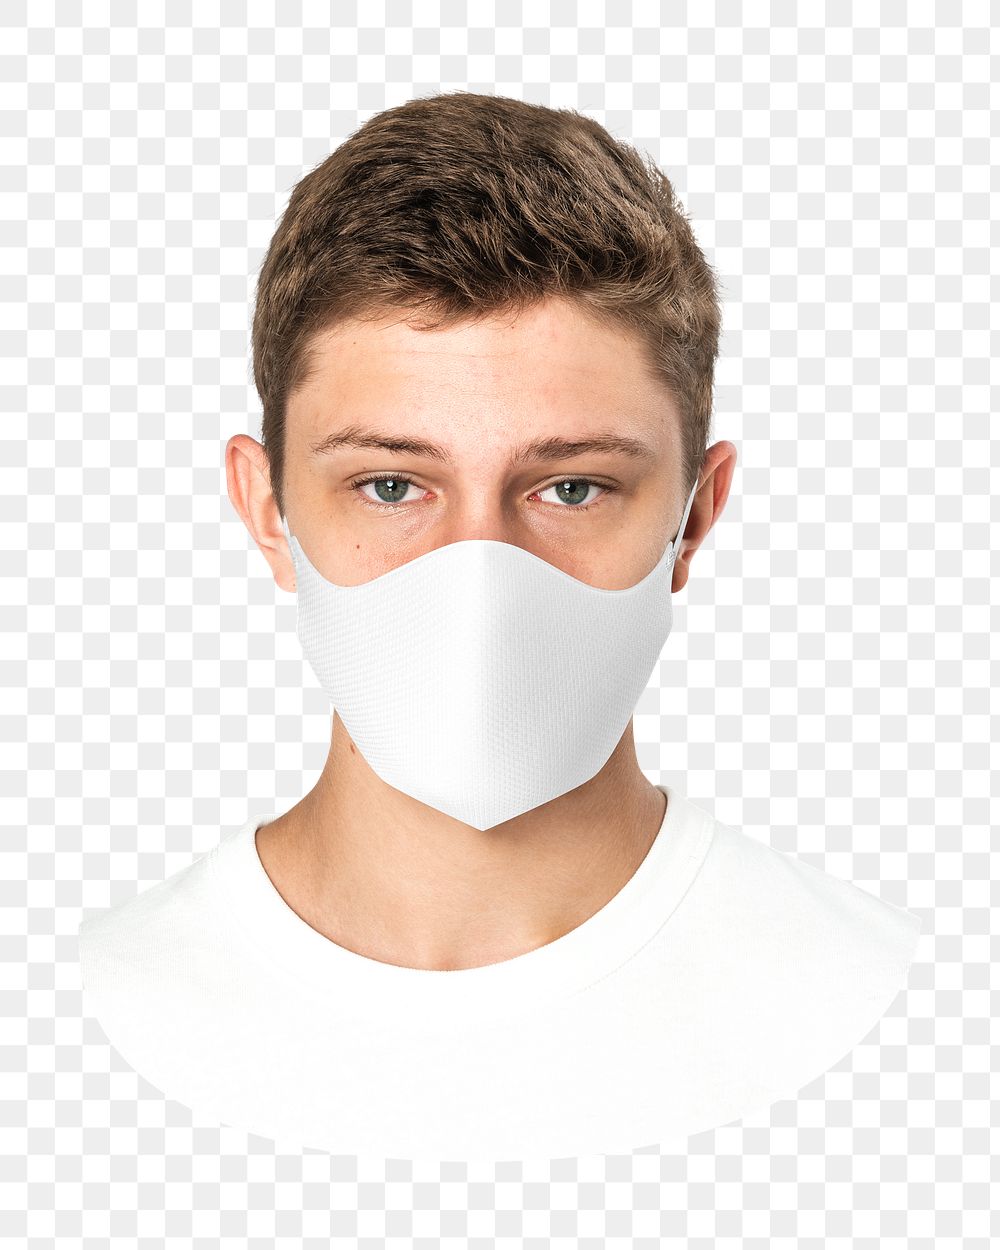 Png boy in white face mask, transparent background